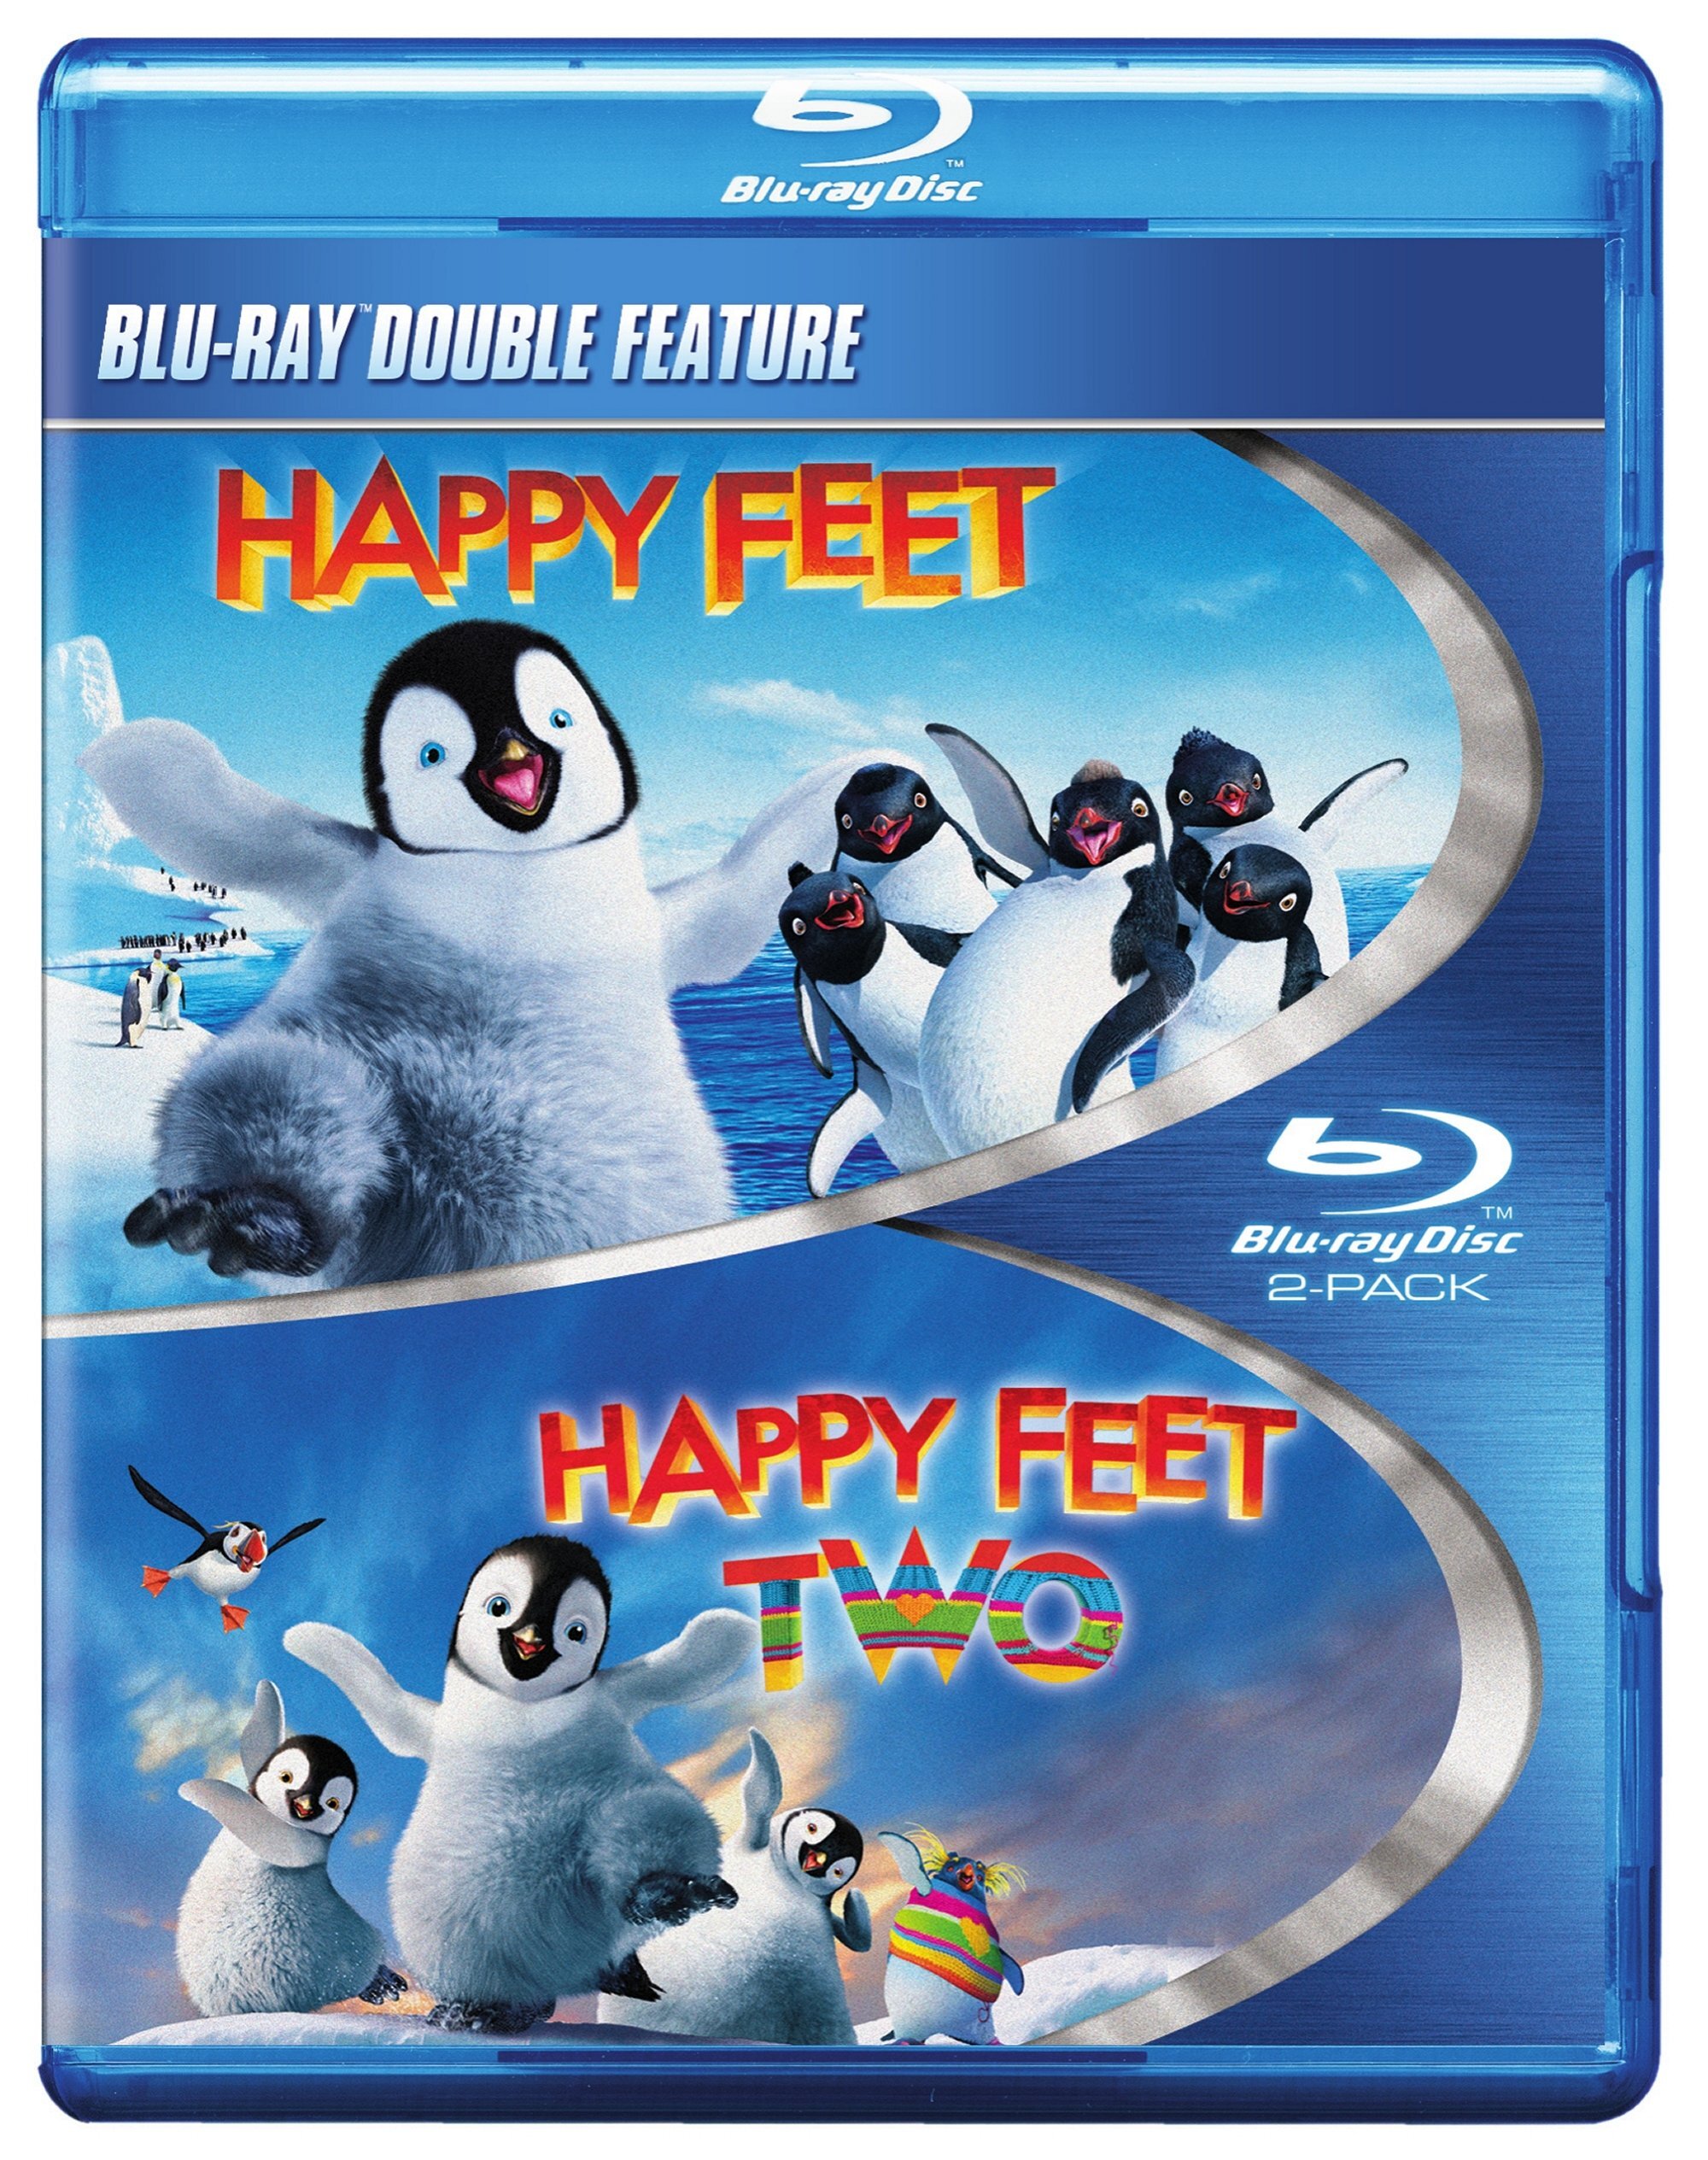 Happy Feet 1 & 2 (Blu-ray Double Feature) - Blu-ray [ 2011 ]  - Children Movies On Blu-ray - Movies On GRUV